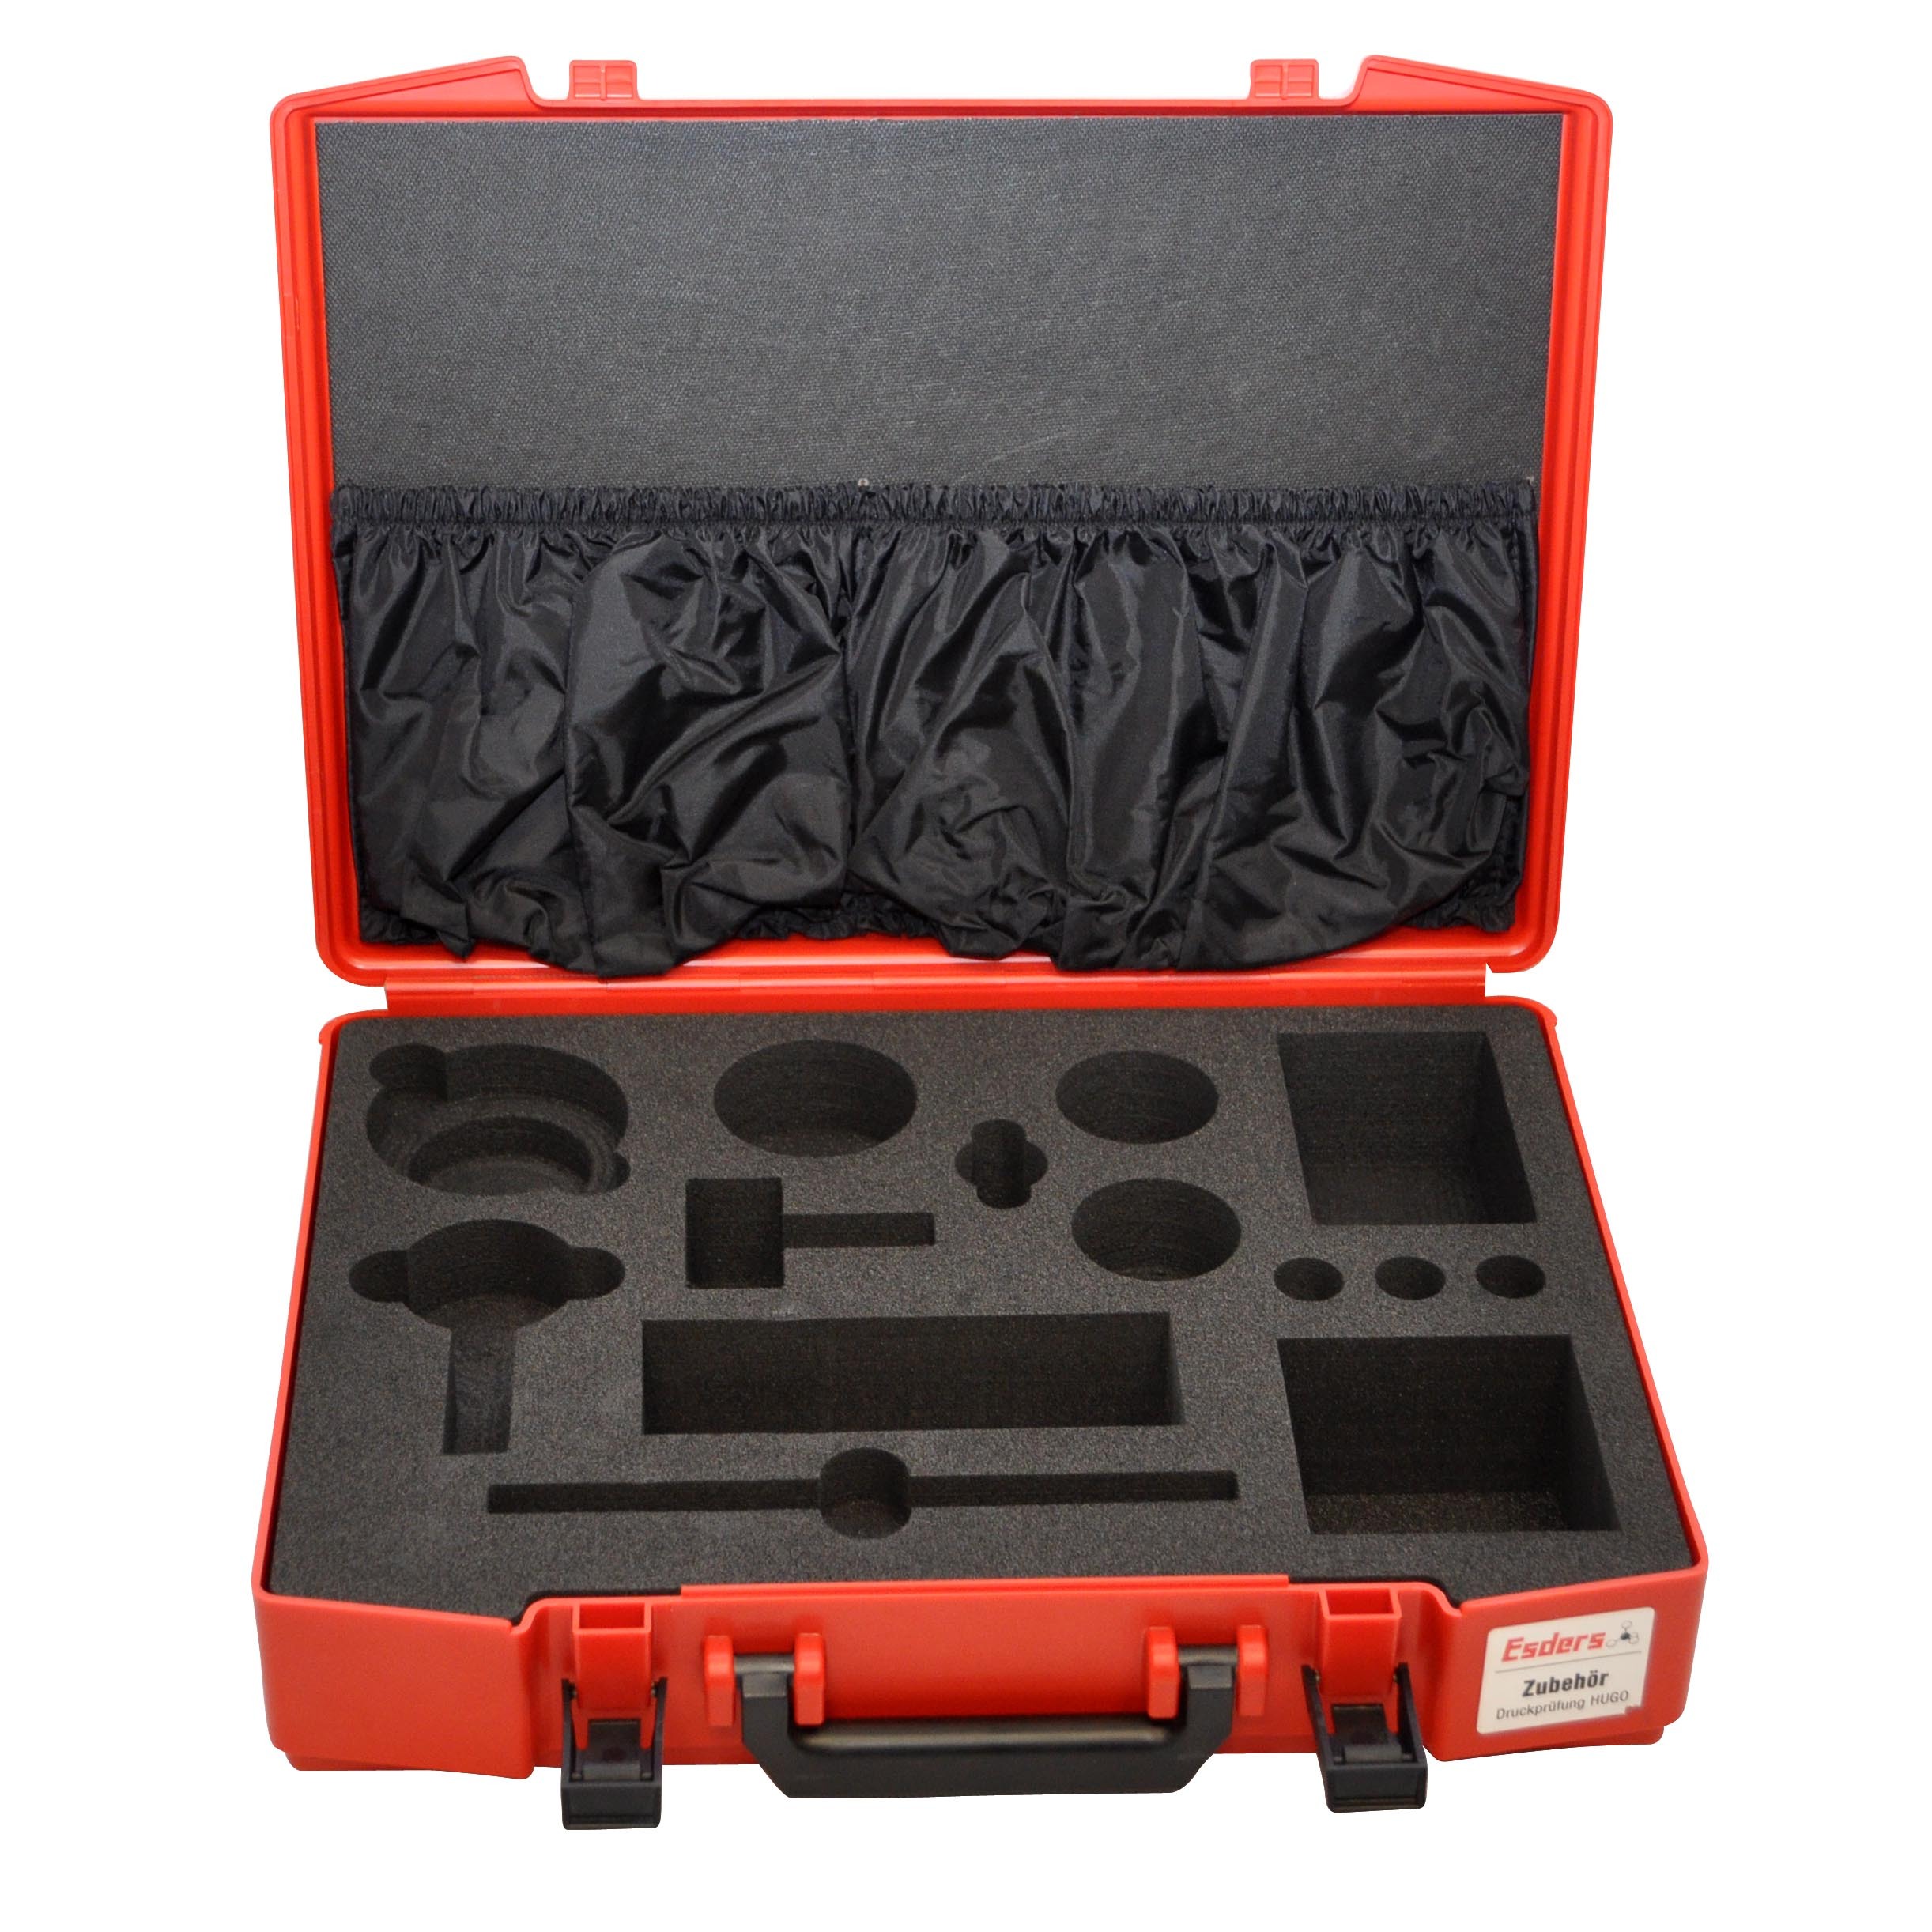 Carrying case with foam insert for HUG